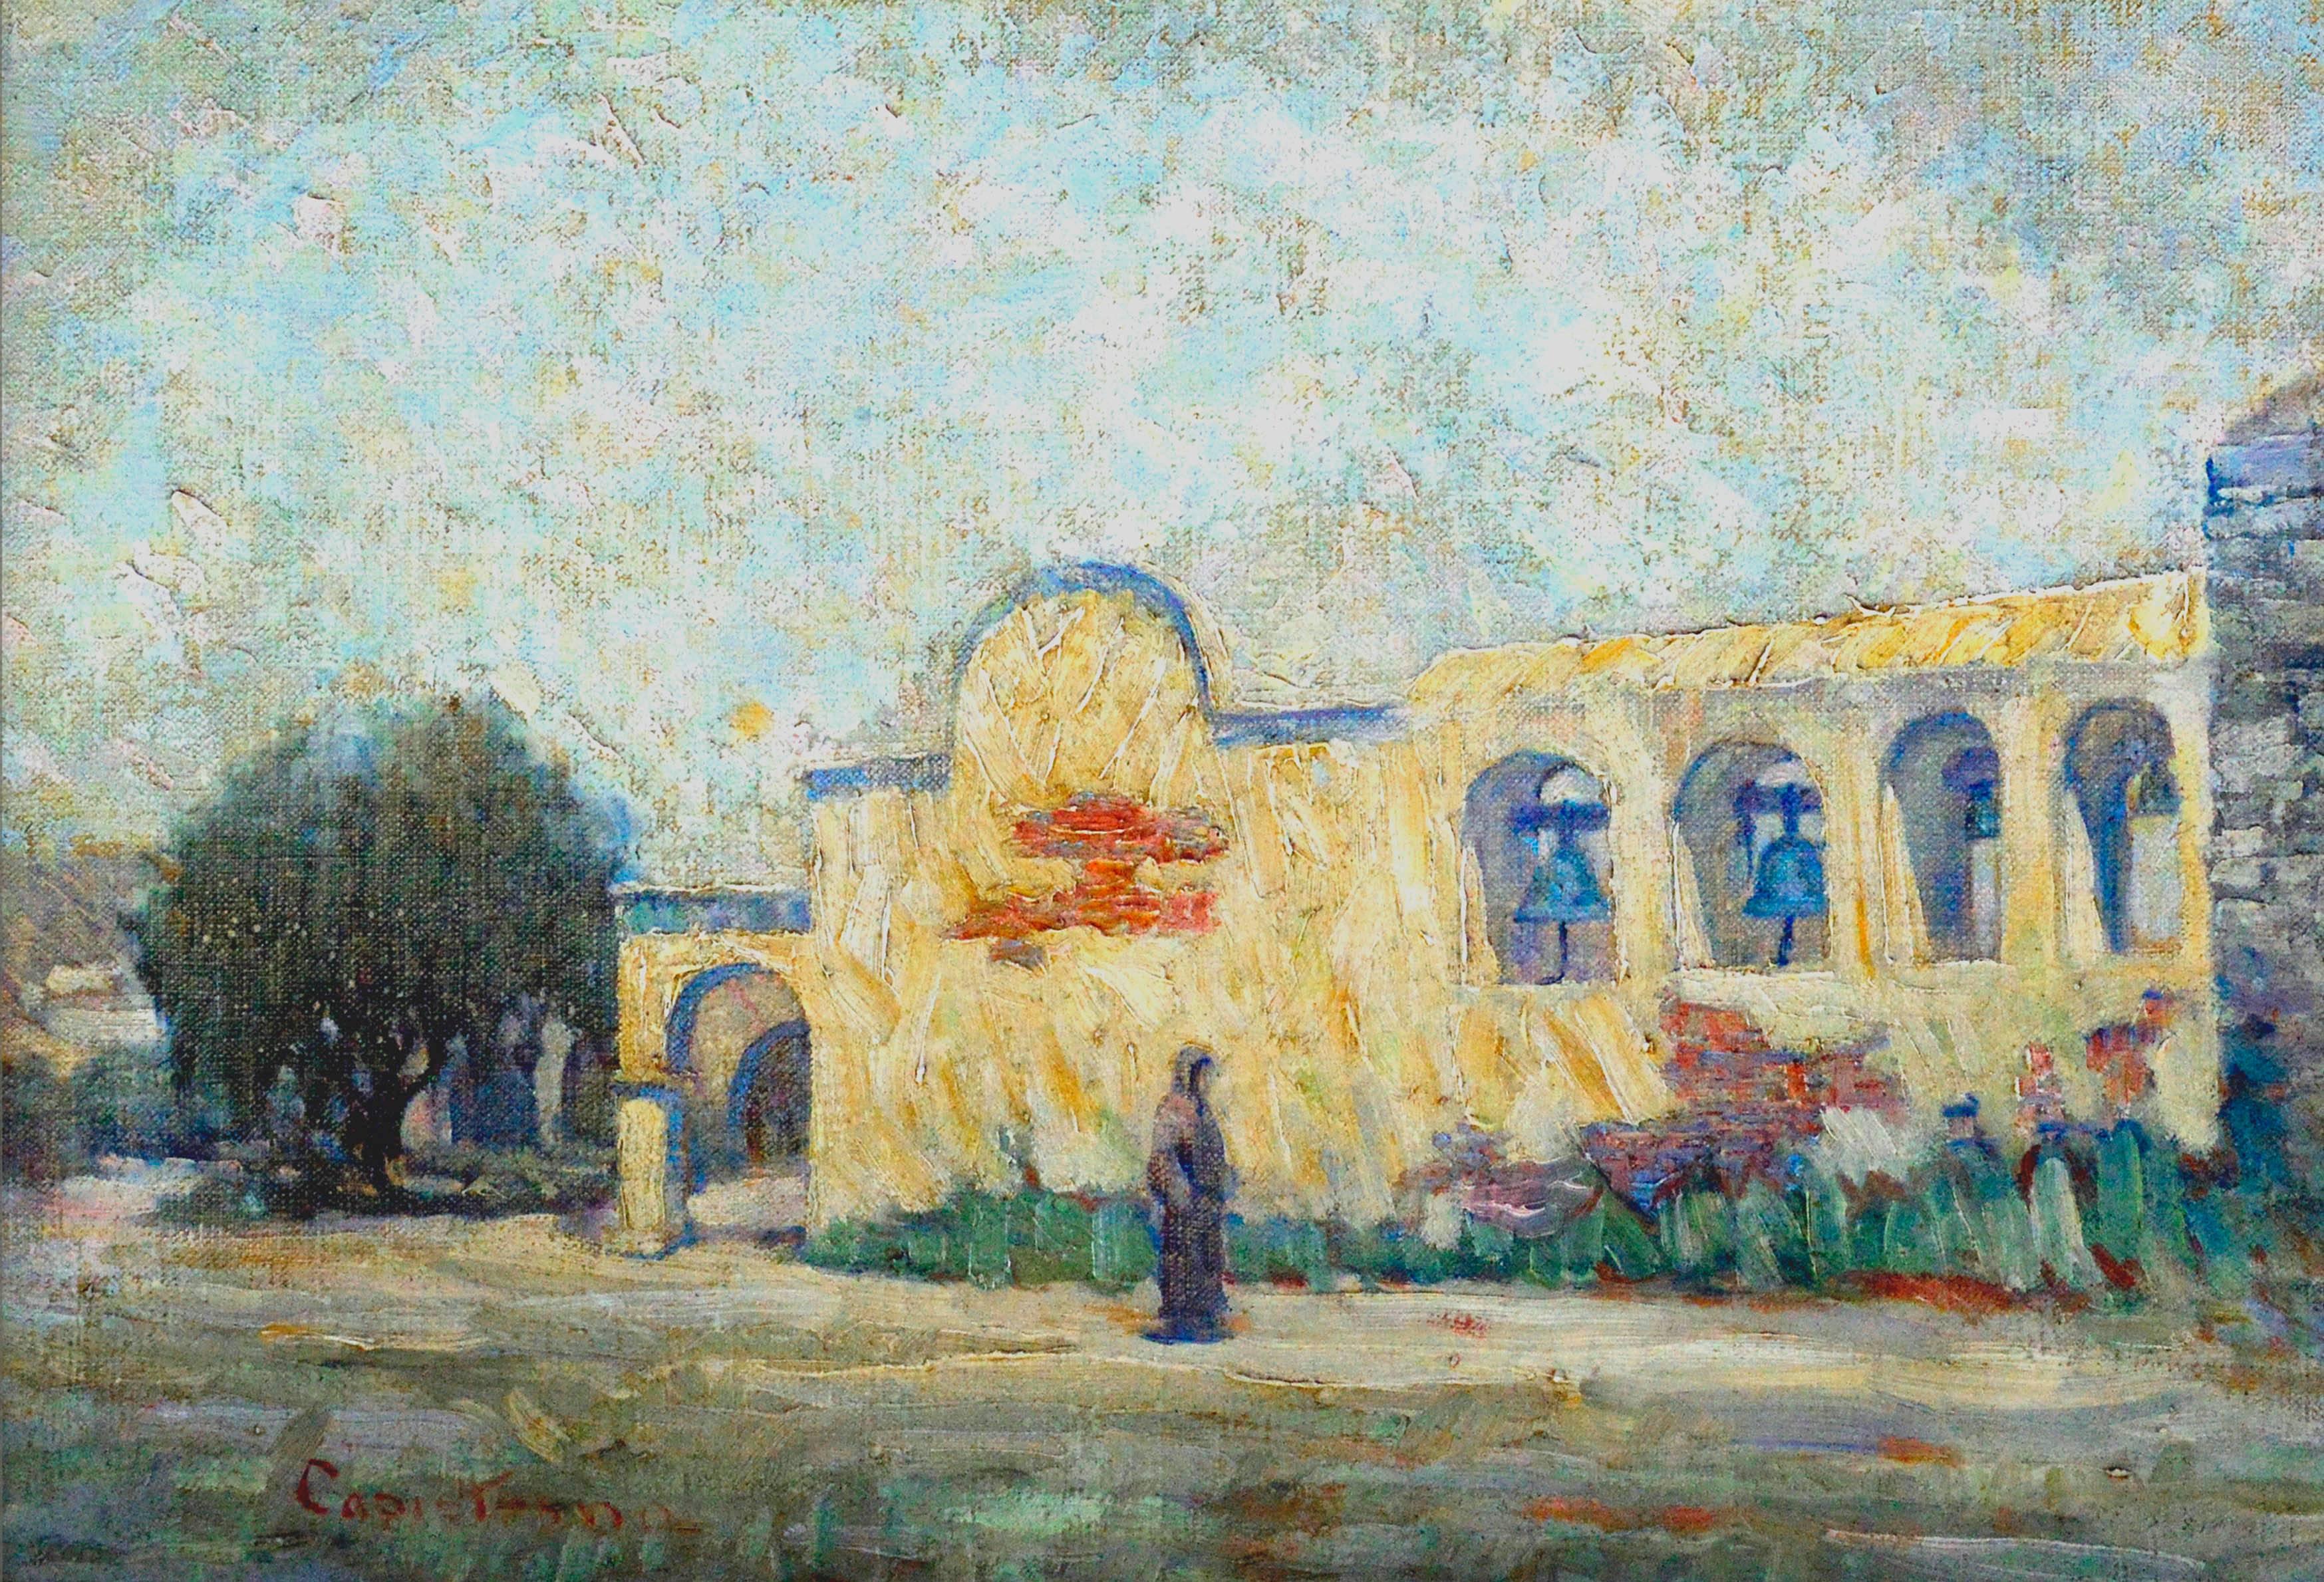 Early 20th Century Mission San Juan Capistrano - Figurative Landscape - Painting by Warren E. Rollins